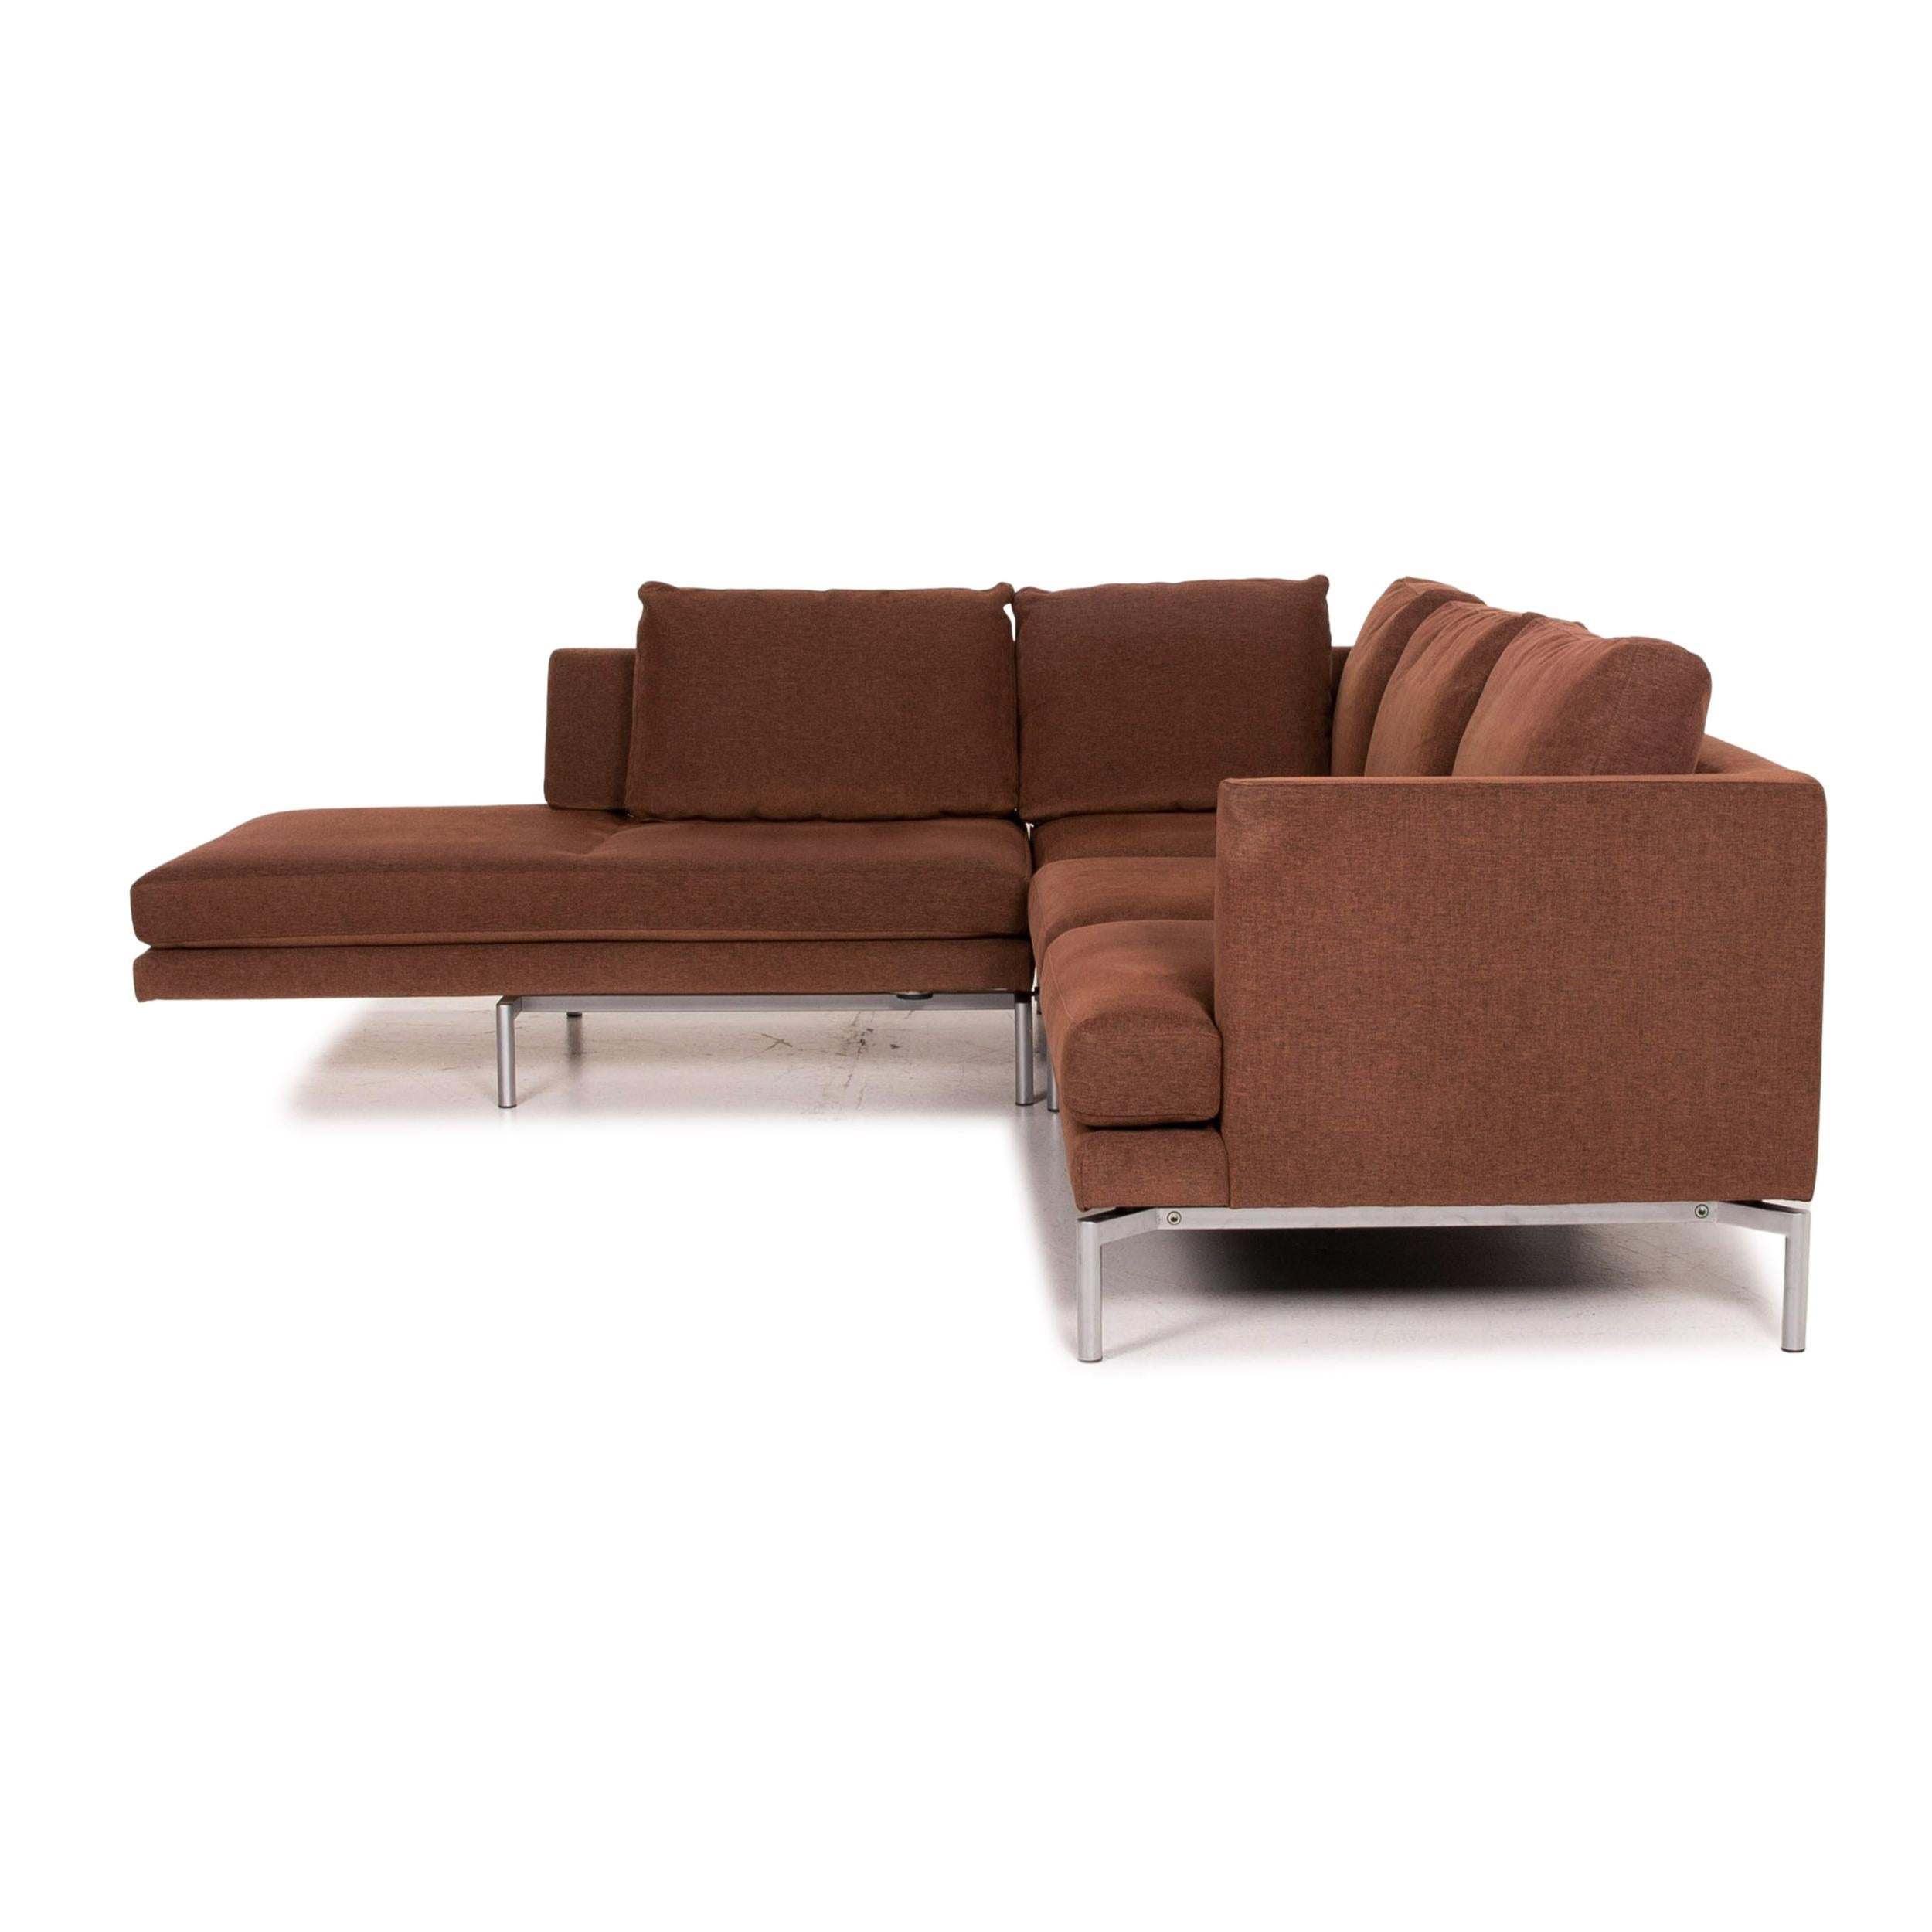 Walter Knoll Good Times Fabric Corner Sofa Brown Function Couch 6